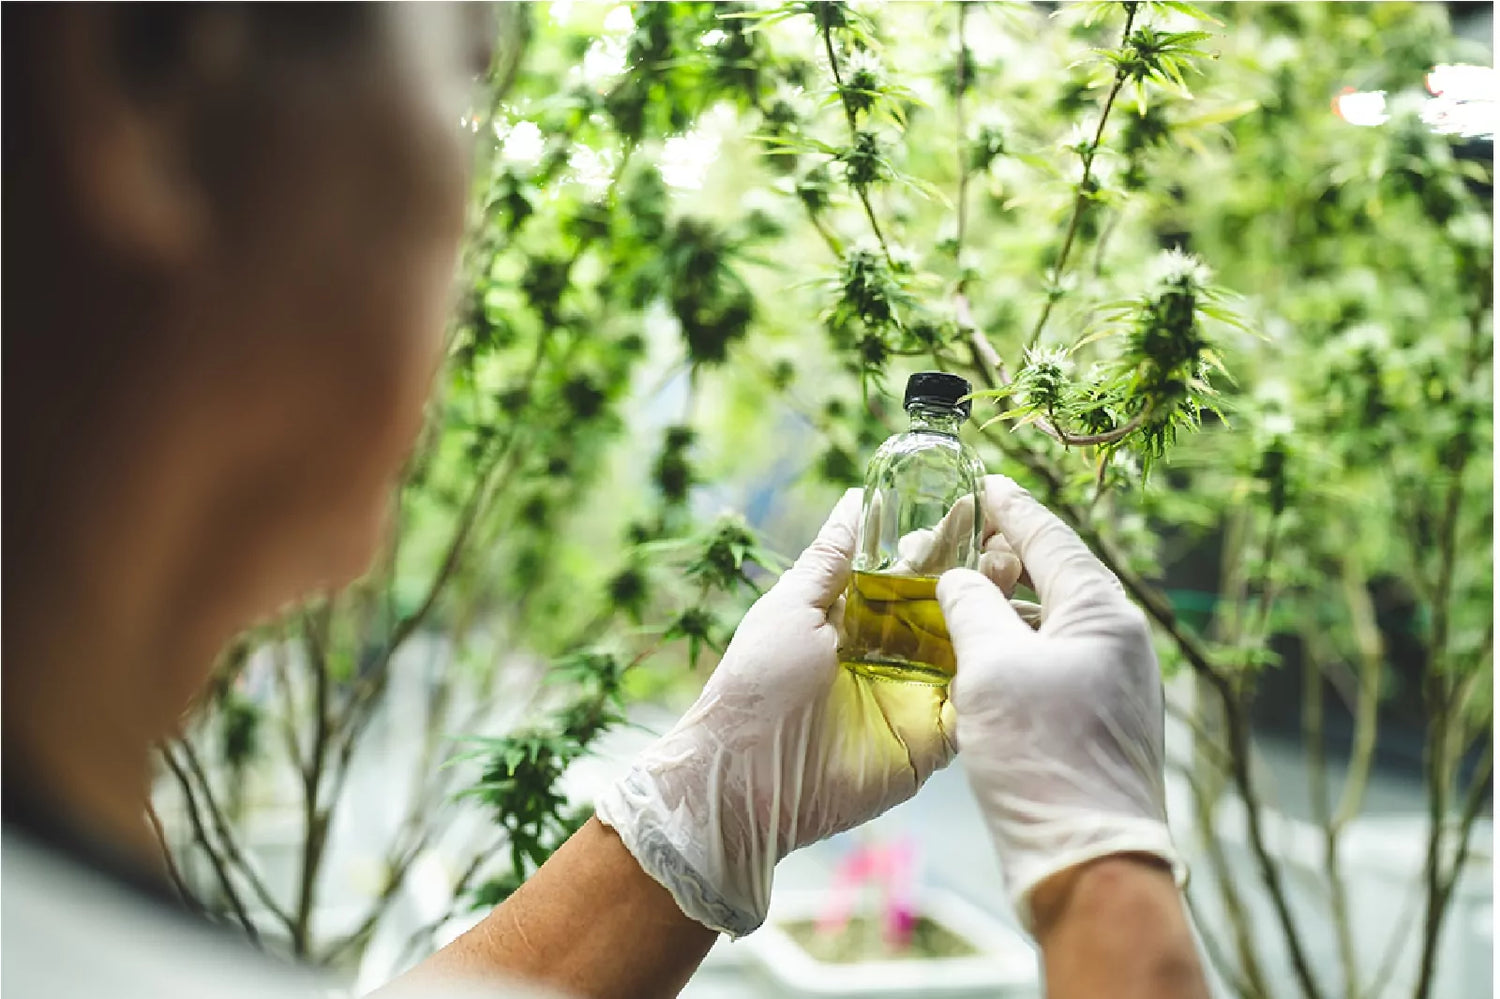 A man standing in front of CBD plants wearing white handgloves holding a CBD oil bottle